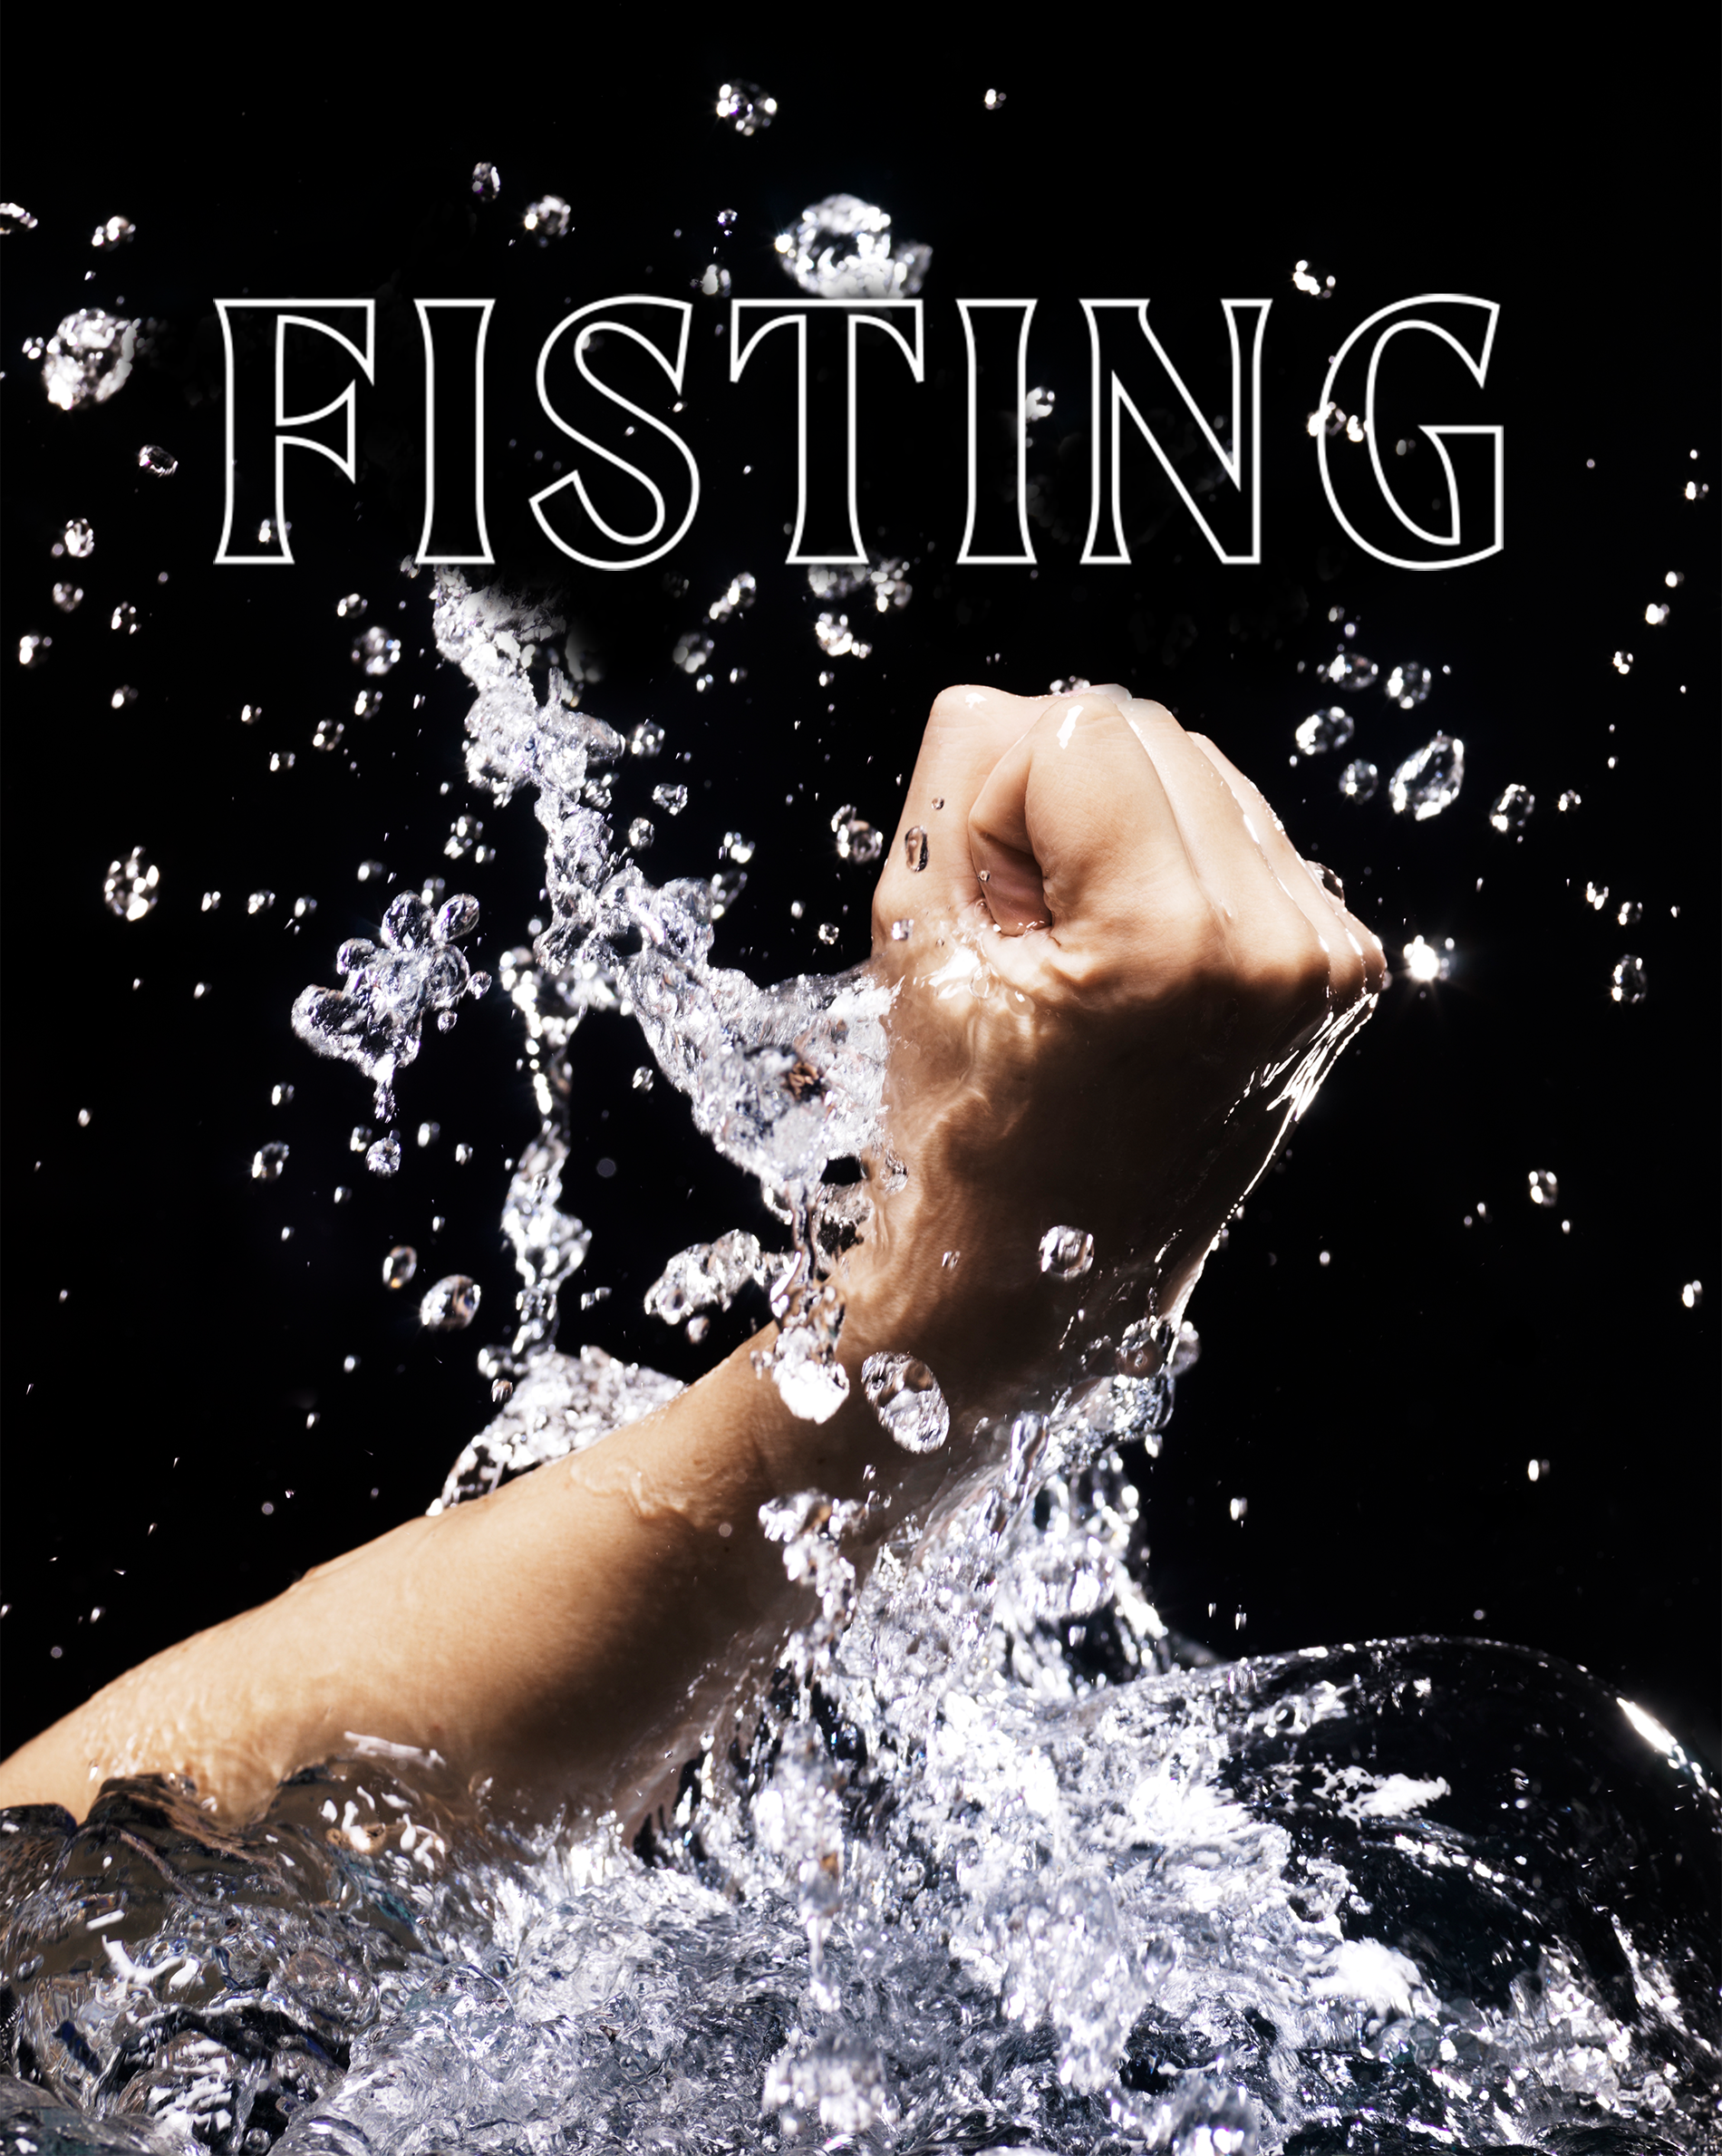 Fisting Her Ass Bleeding - 24 Fisting Tips for Beginners - How Do You Fist A Woman?